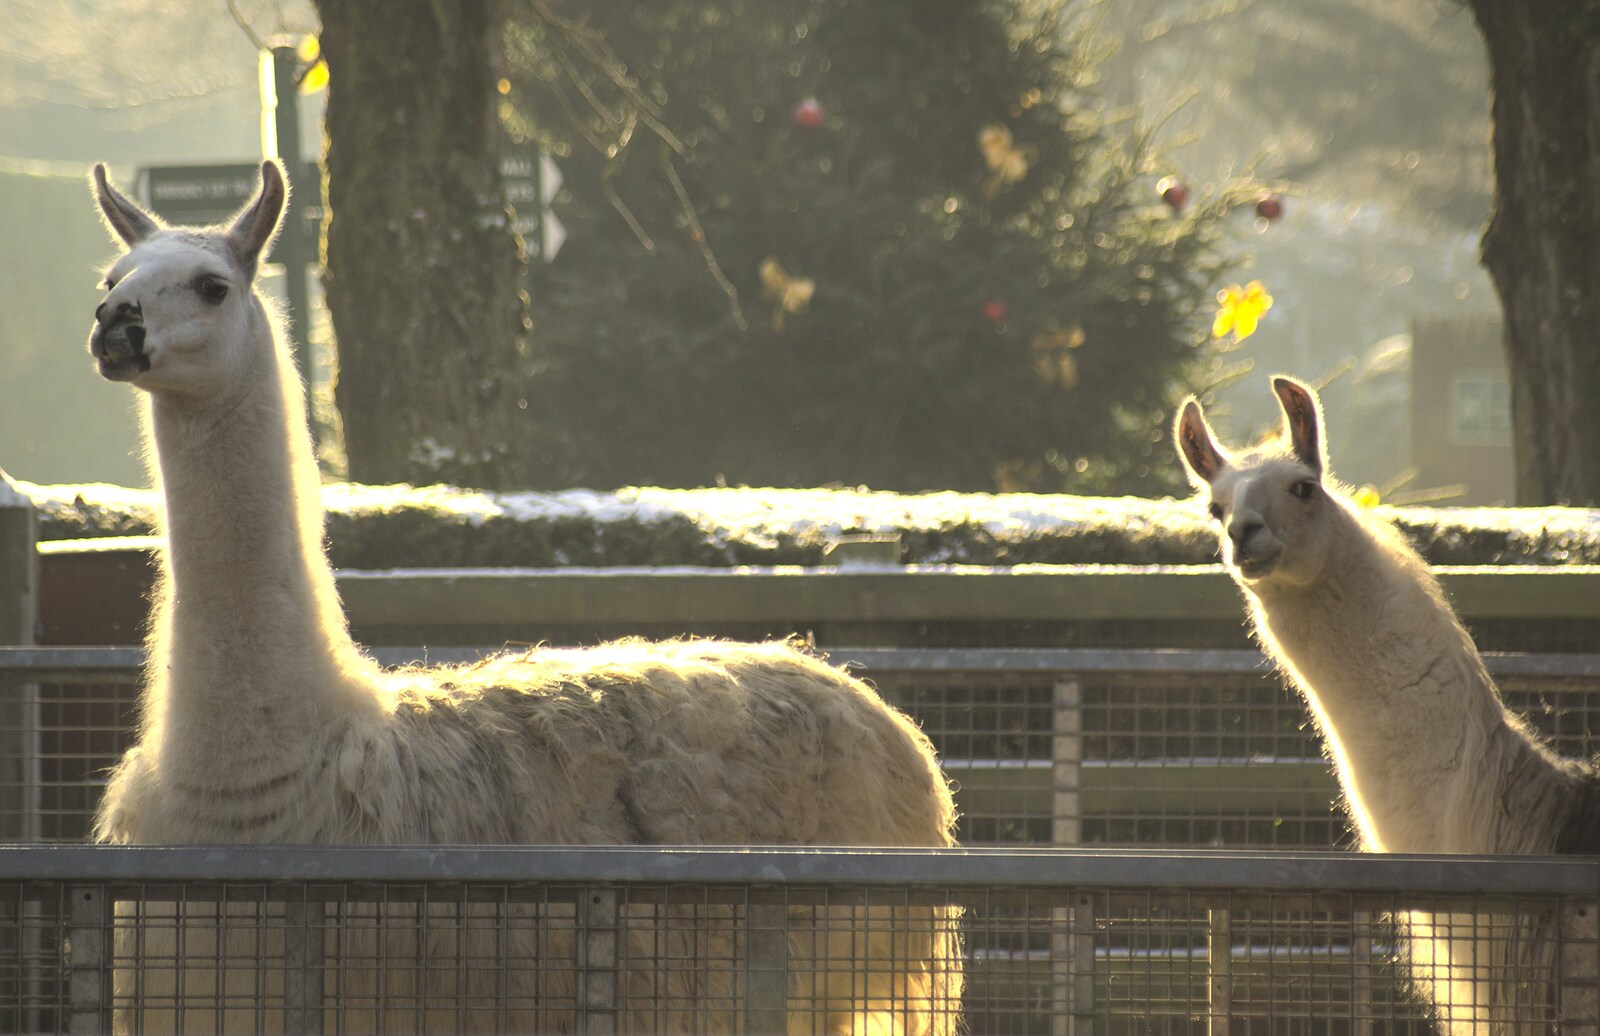 A pair of Llamas from Sledging, A Trip to the Zoo, and Thrandeston Carols, Diss and Banham, Norfolk - 20th December 2010